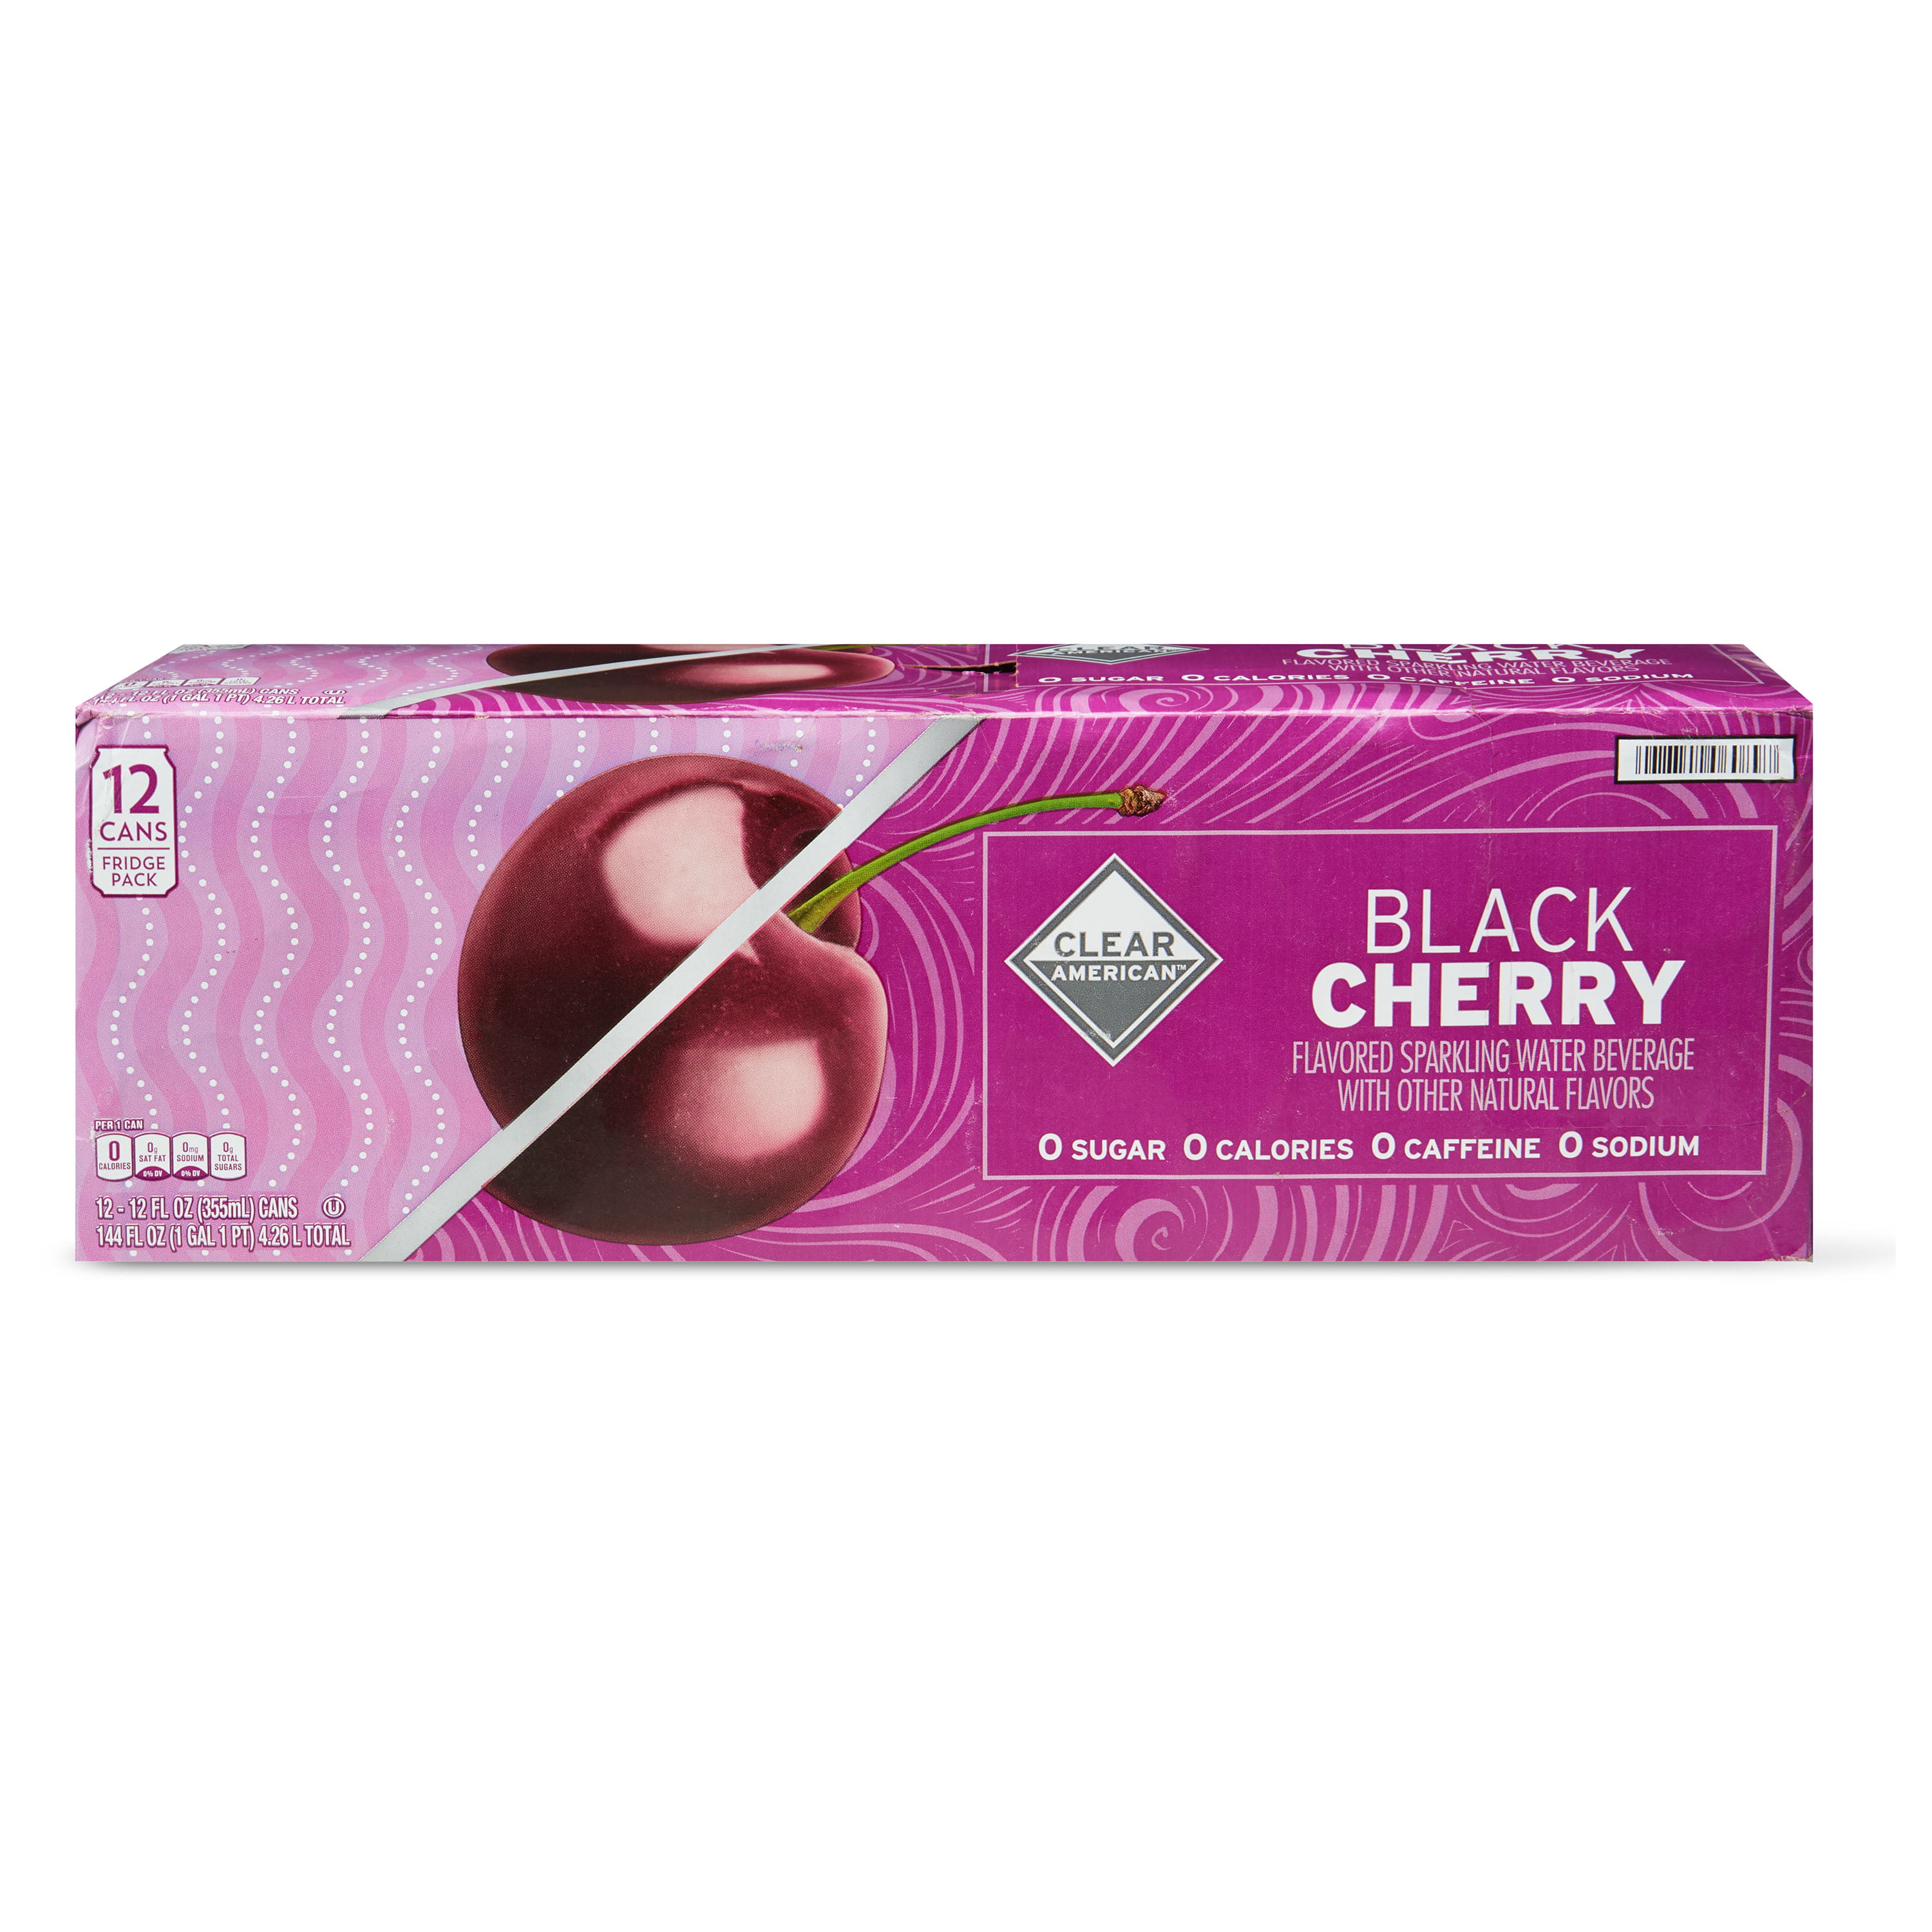 Clear American Black Cherry Sparkling Water, 12 Fl Oz, 12 Pack Cans - Walmart.com